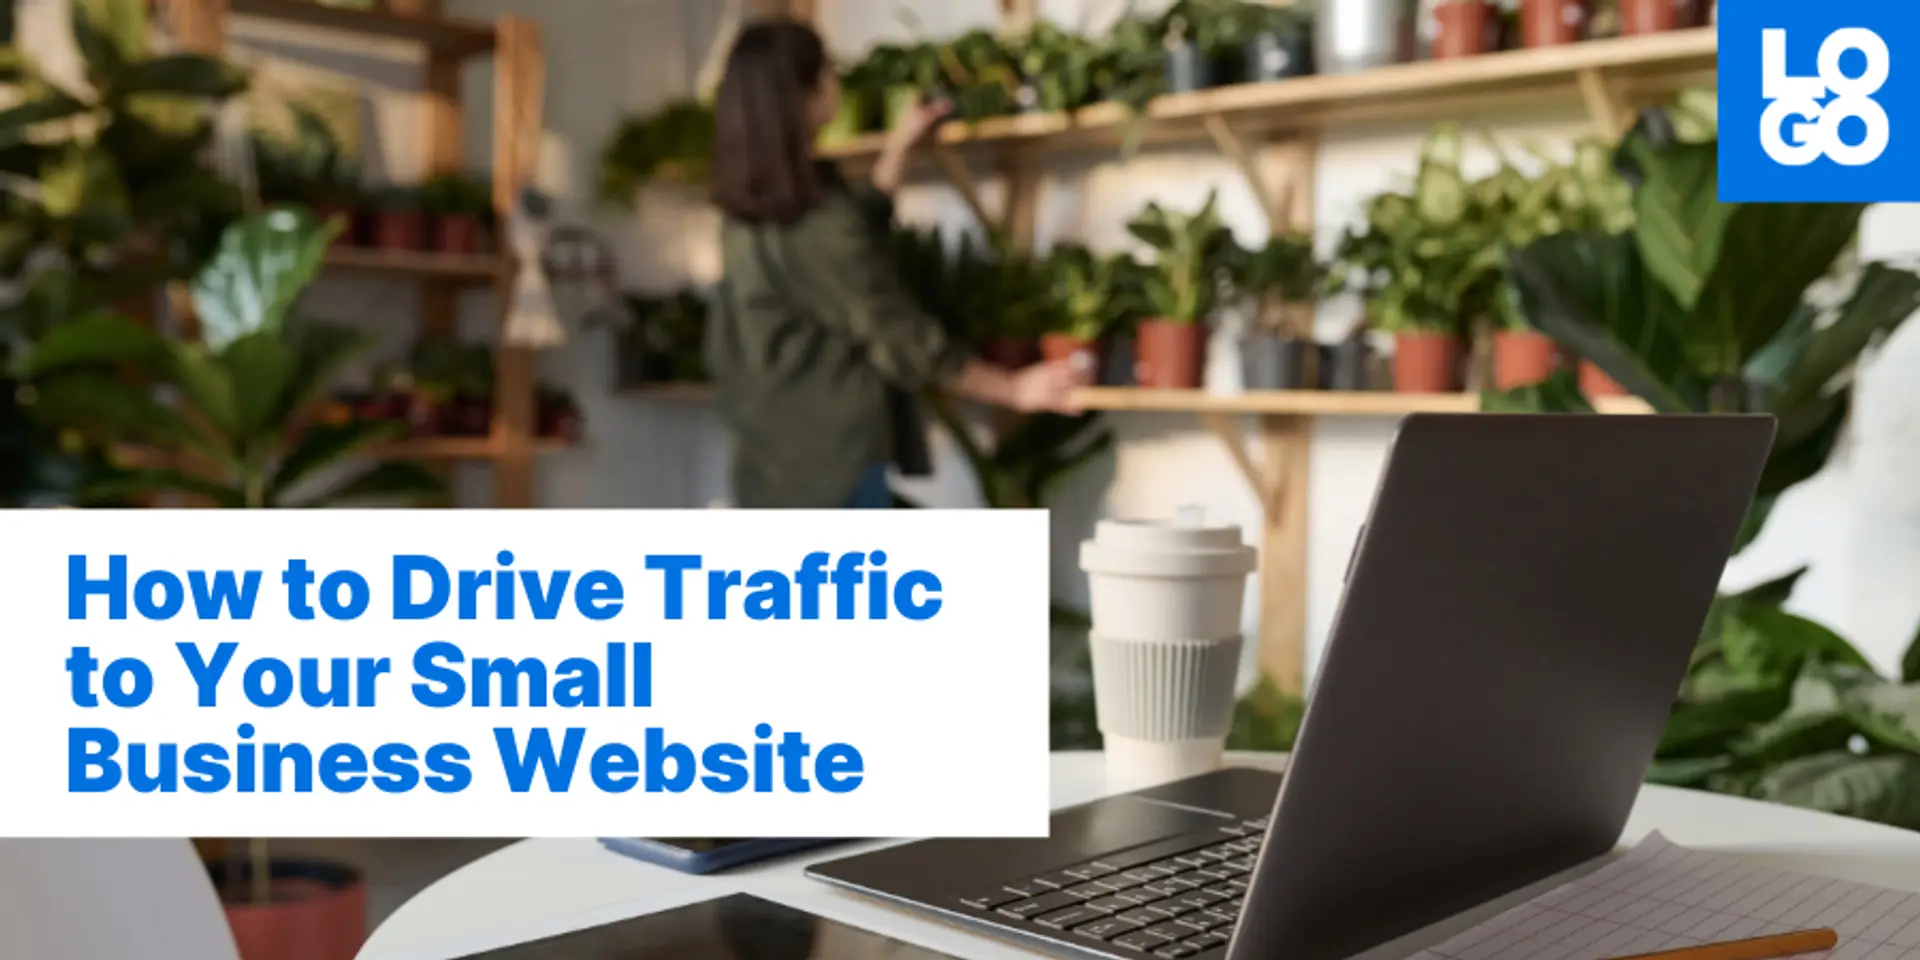 How to Drive Traffic to Your Small Business Website